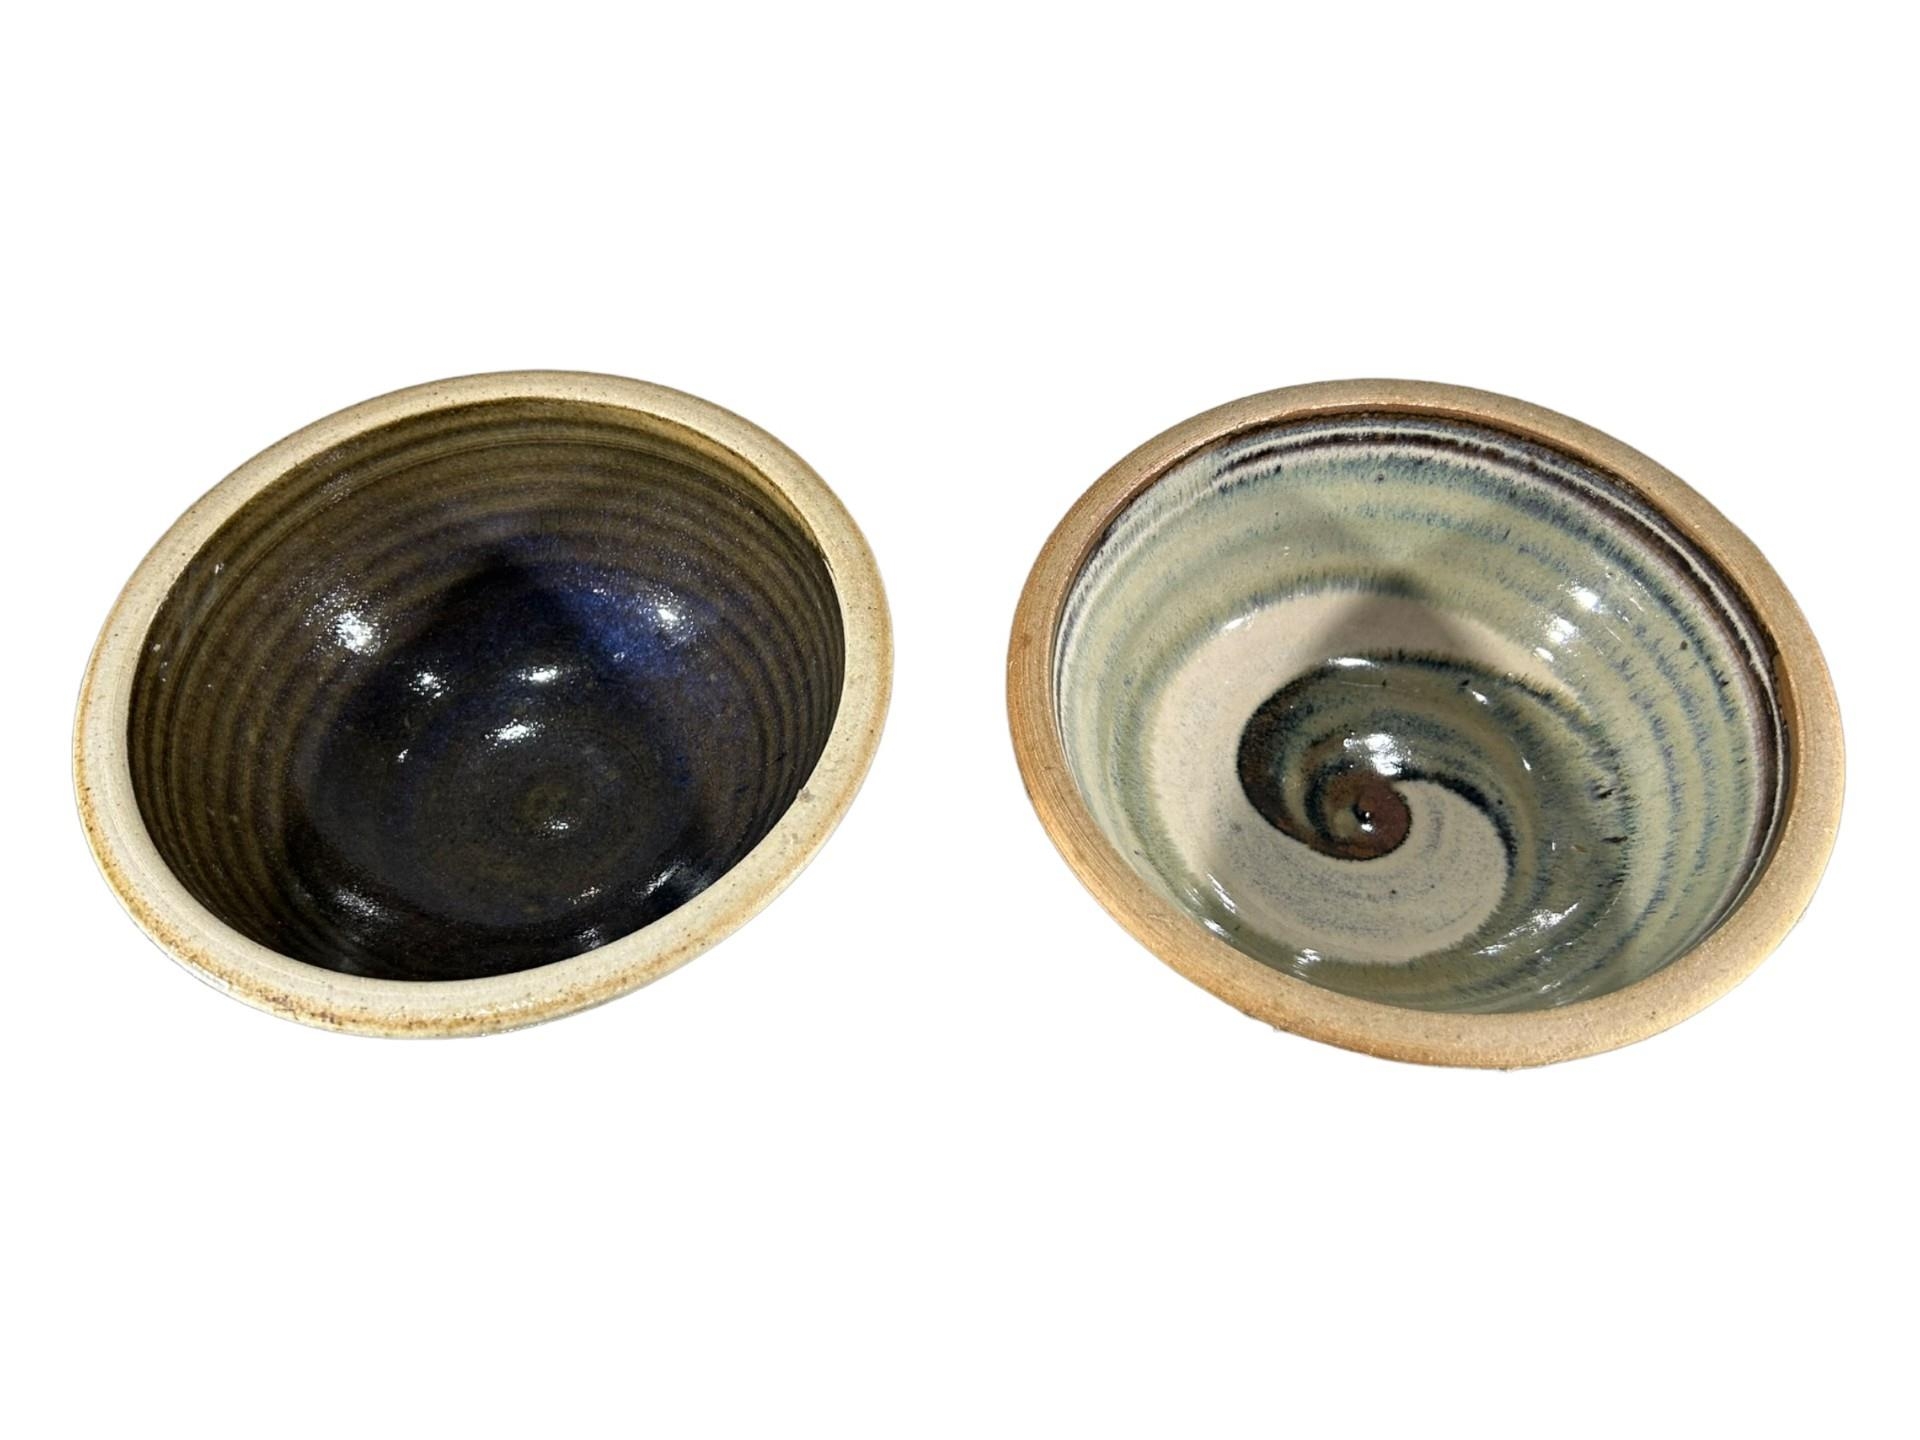 A COLLECTION OF FIVE CERAMICS FESTIVAL STUDIO POTTERY STONEWARE BOWLS, DATED 2001, TWO 2003, 2005 - Image 6 of 7